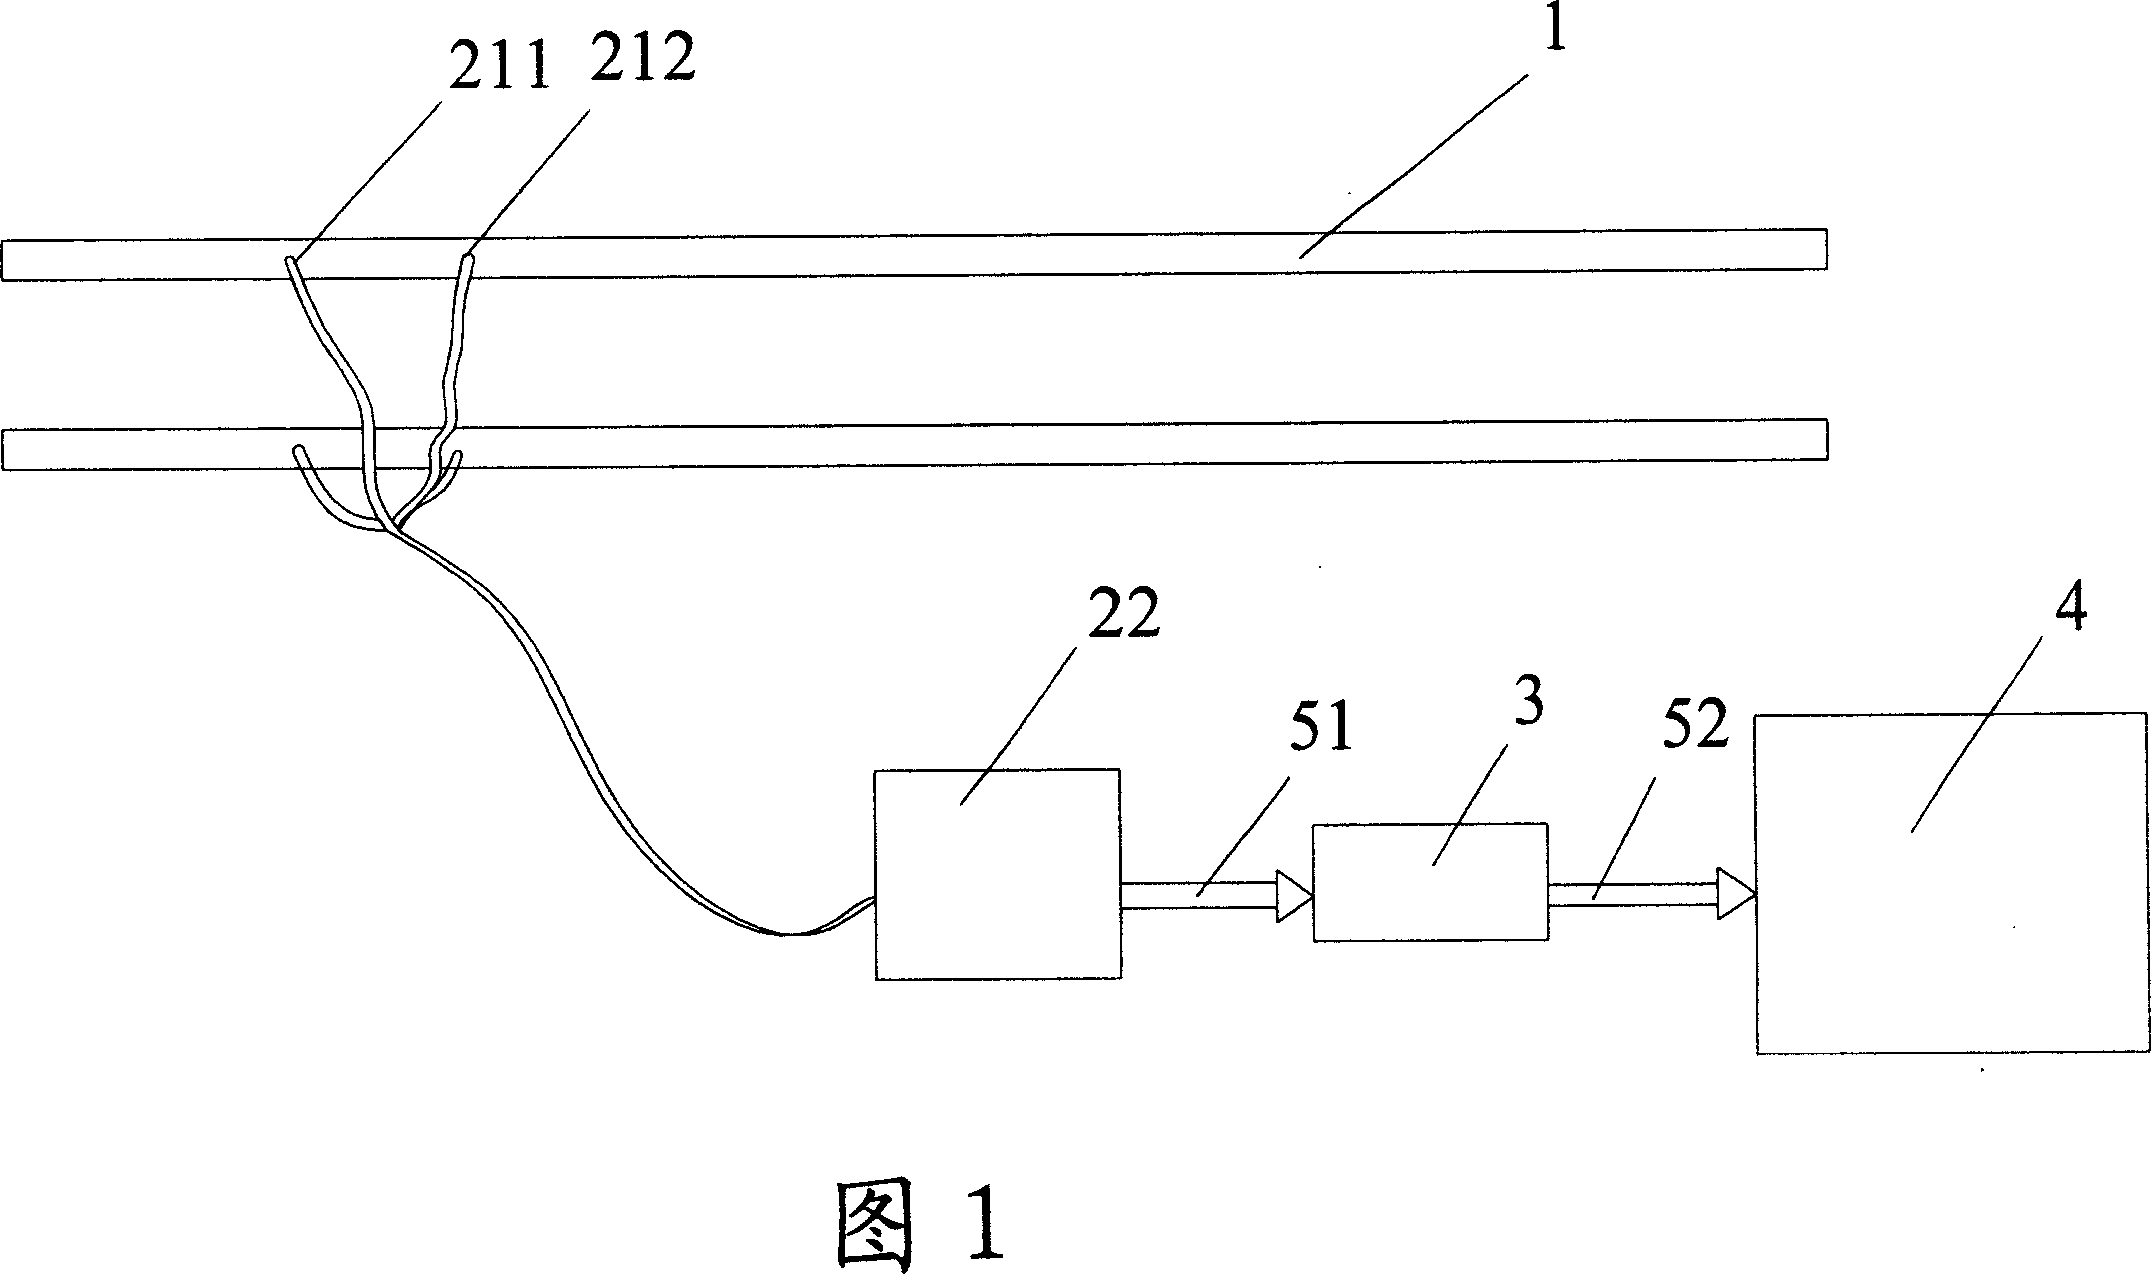 Optical-fiber sensing type railroad track scale and its data processing method